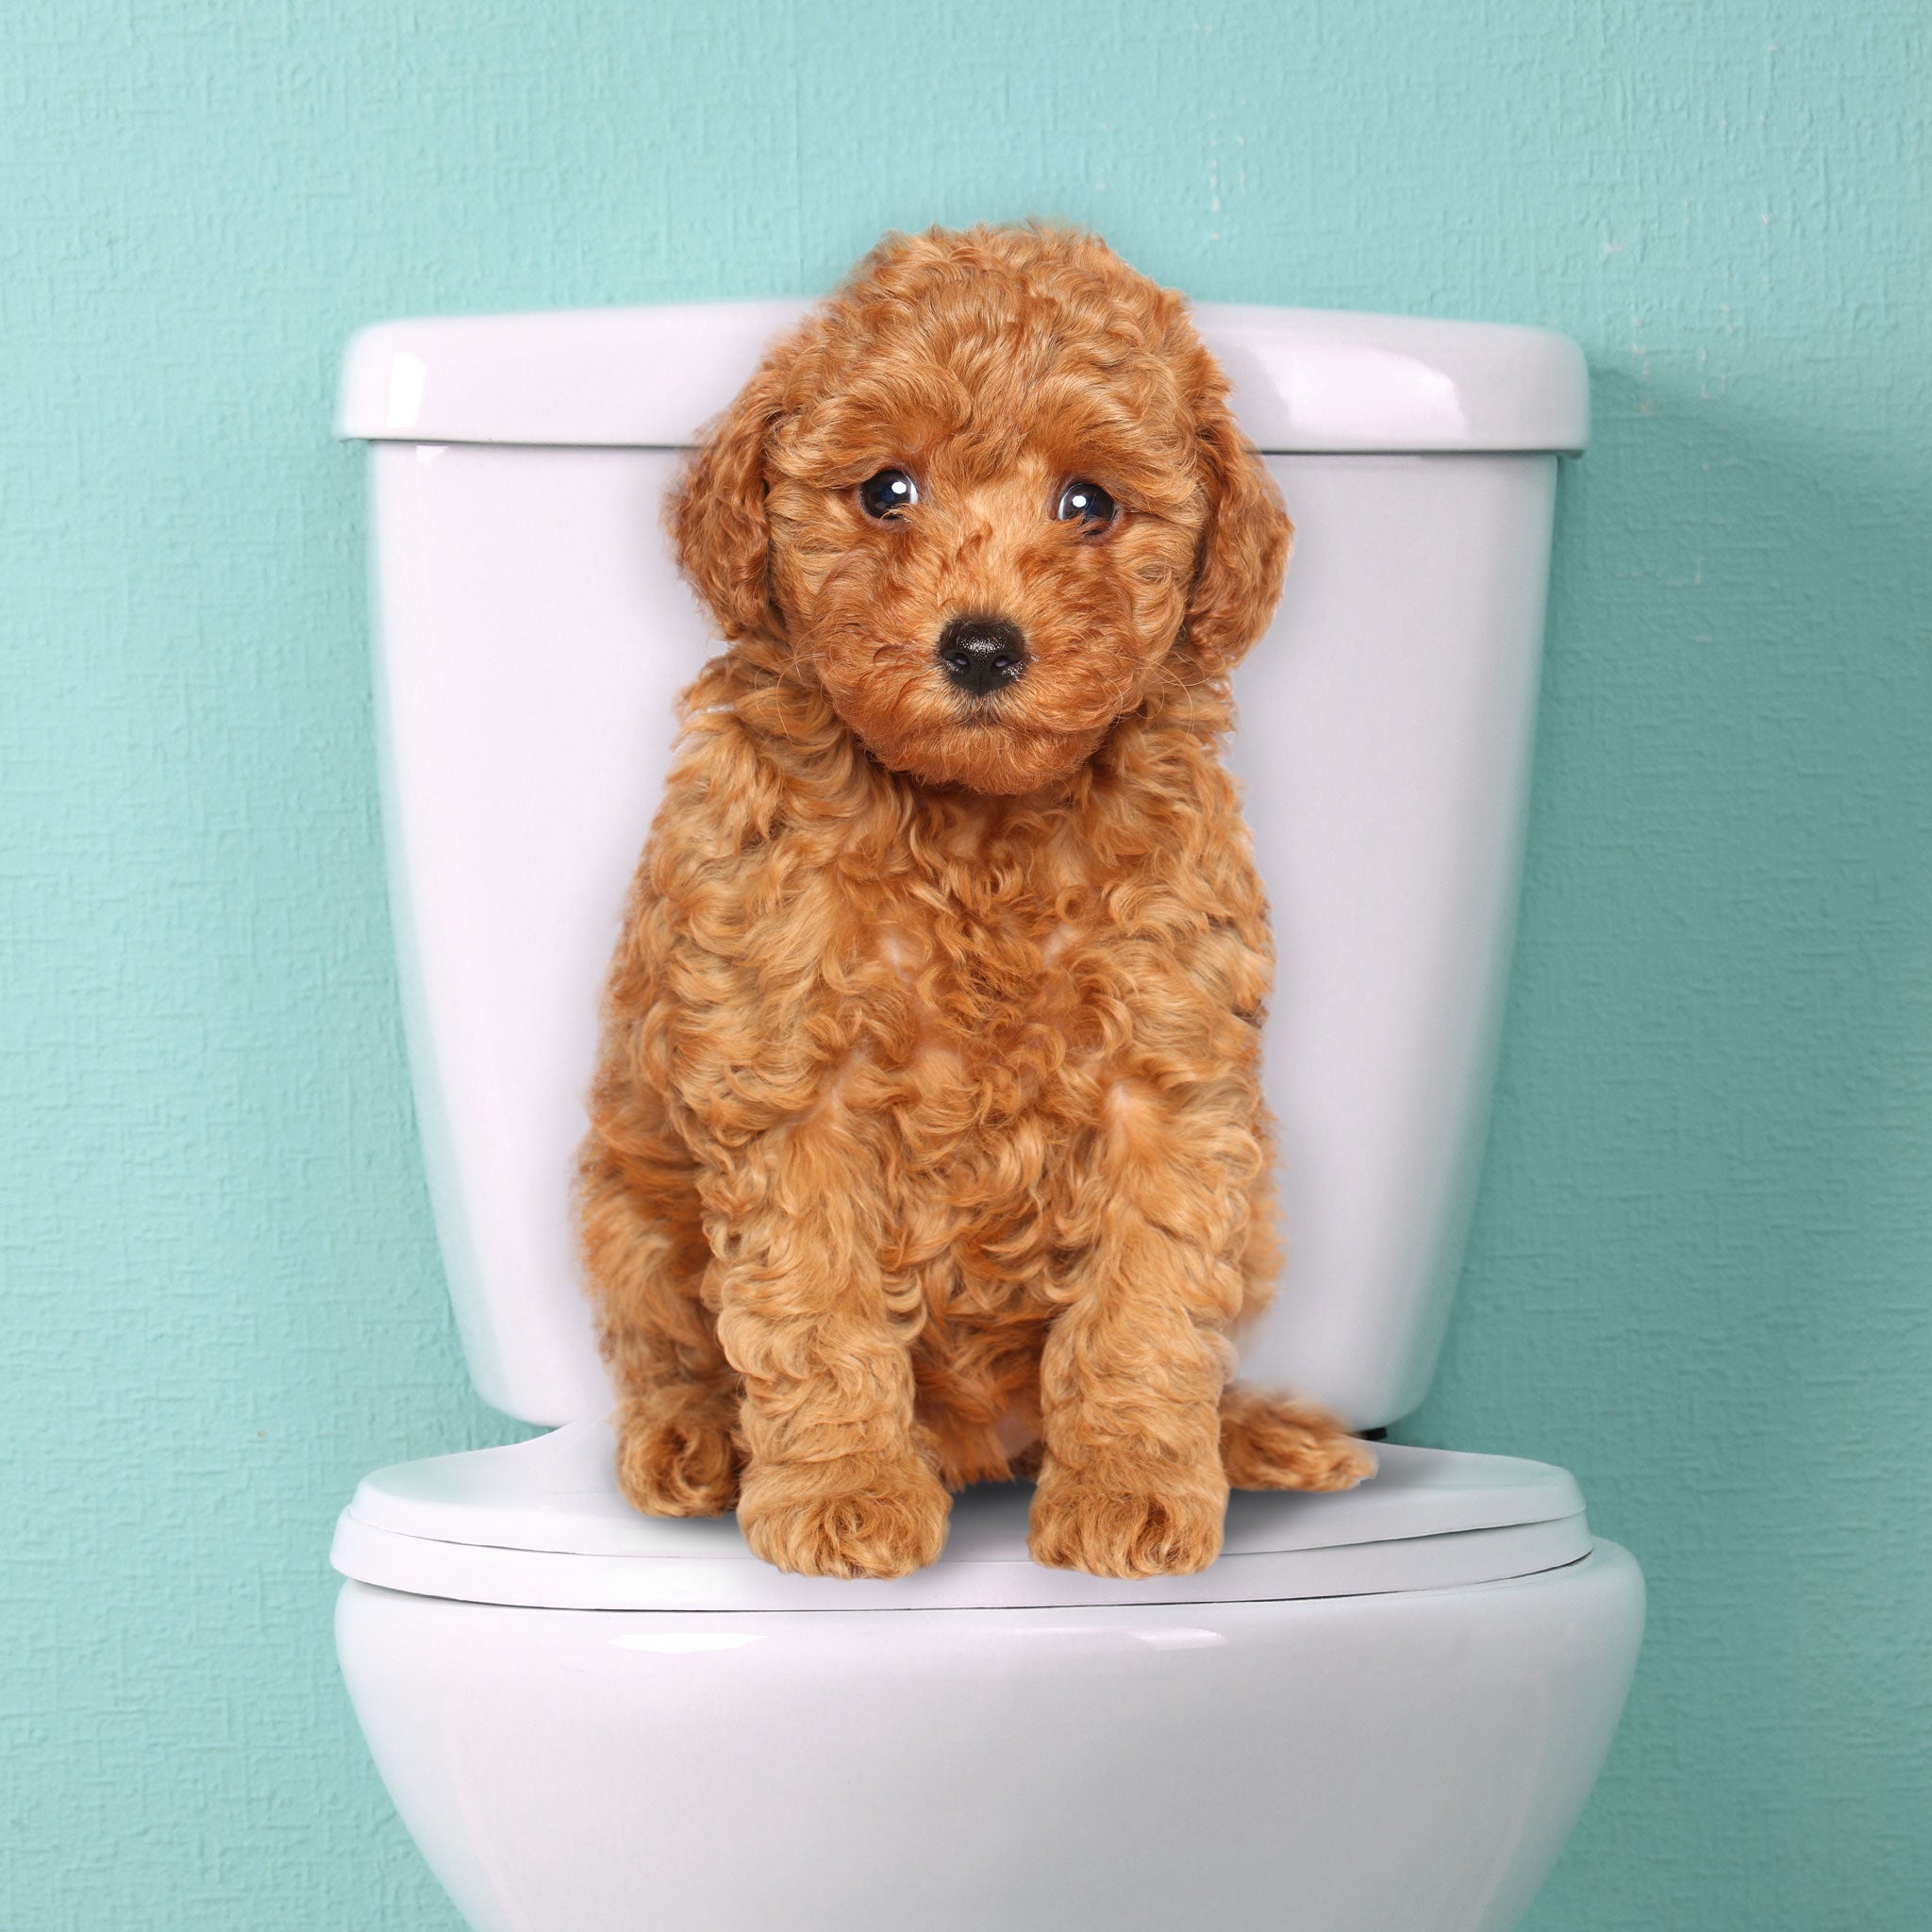 goldendoodle puppy sitting on top of toilet seat teal background wall